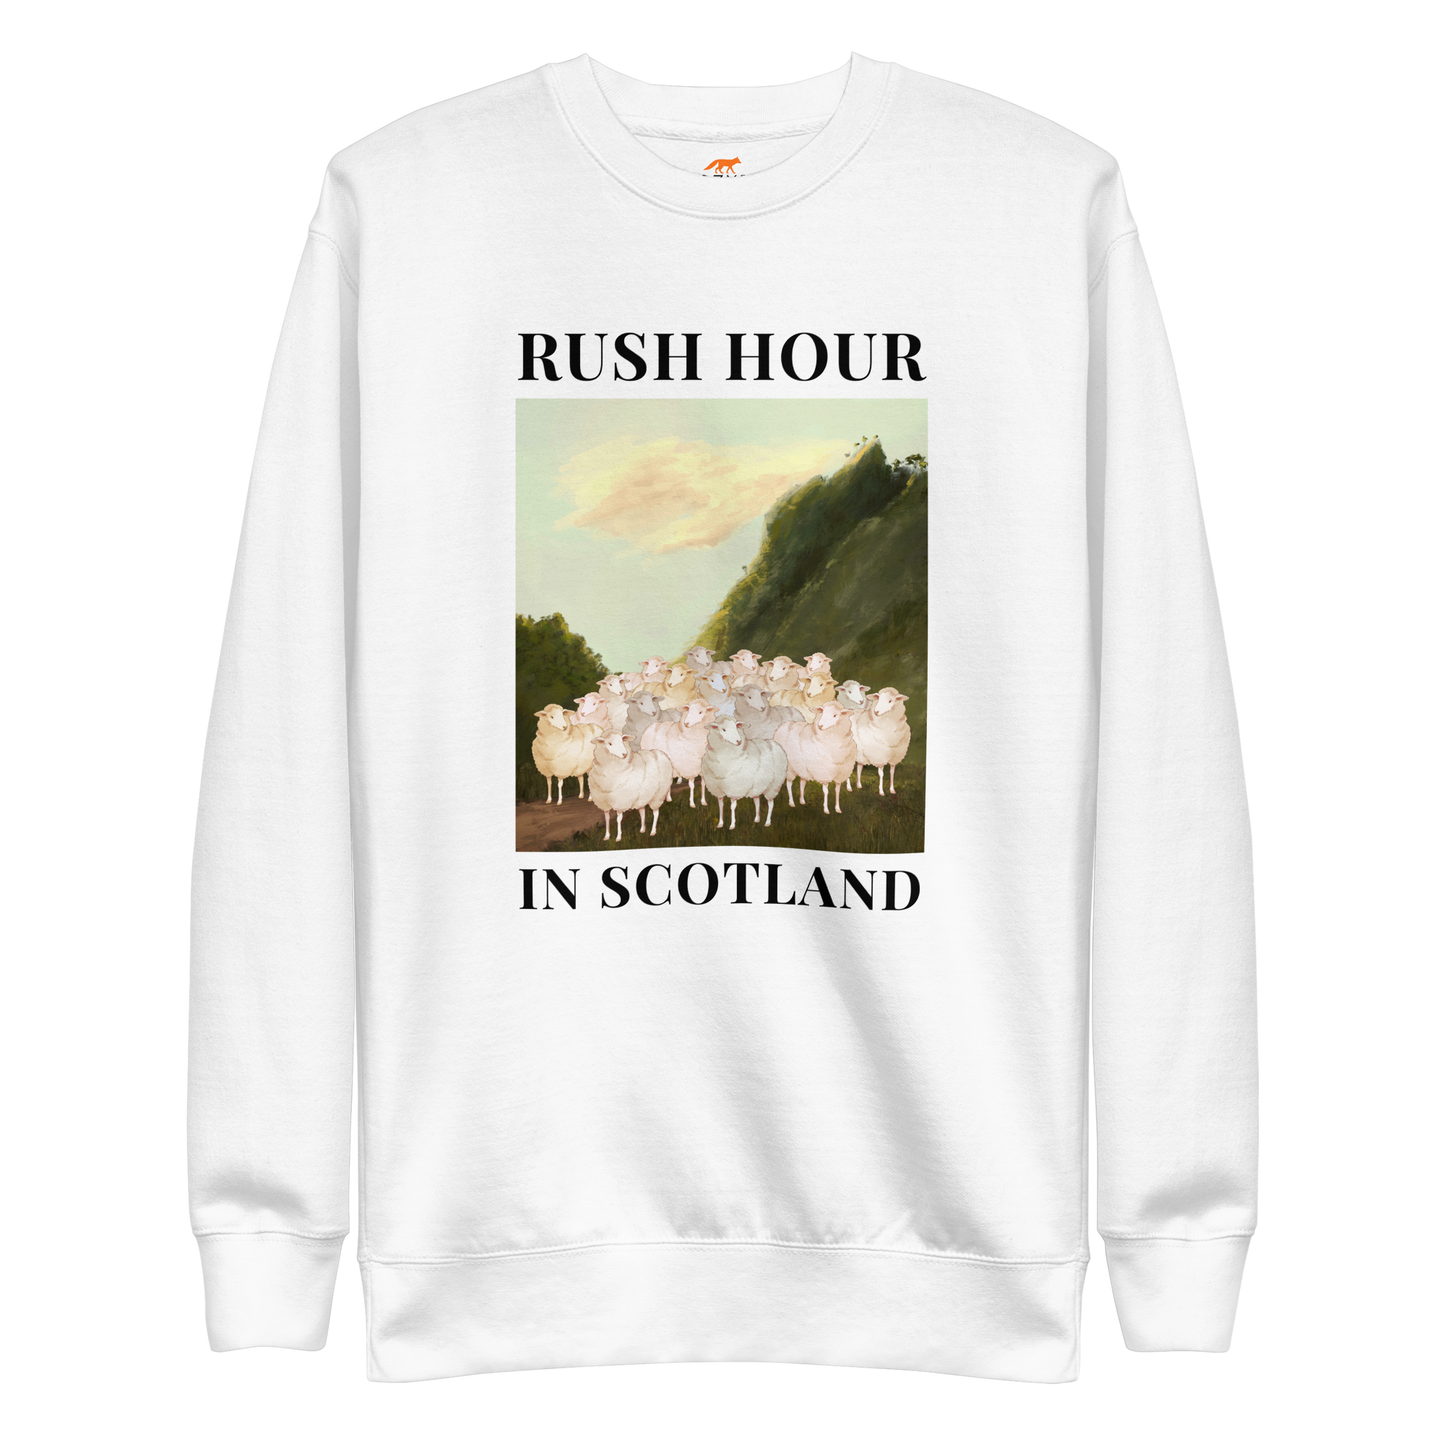 White Premium Sheep Sweatshirt featuring a comical Rush Hour In Scotland graphic on the chest - Artsy/Funny Graphic Sheep Sweatshirts - Boozy Fox